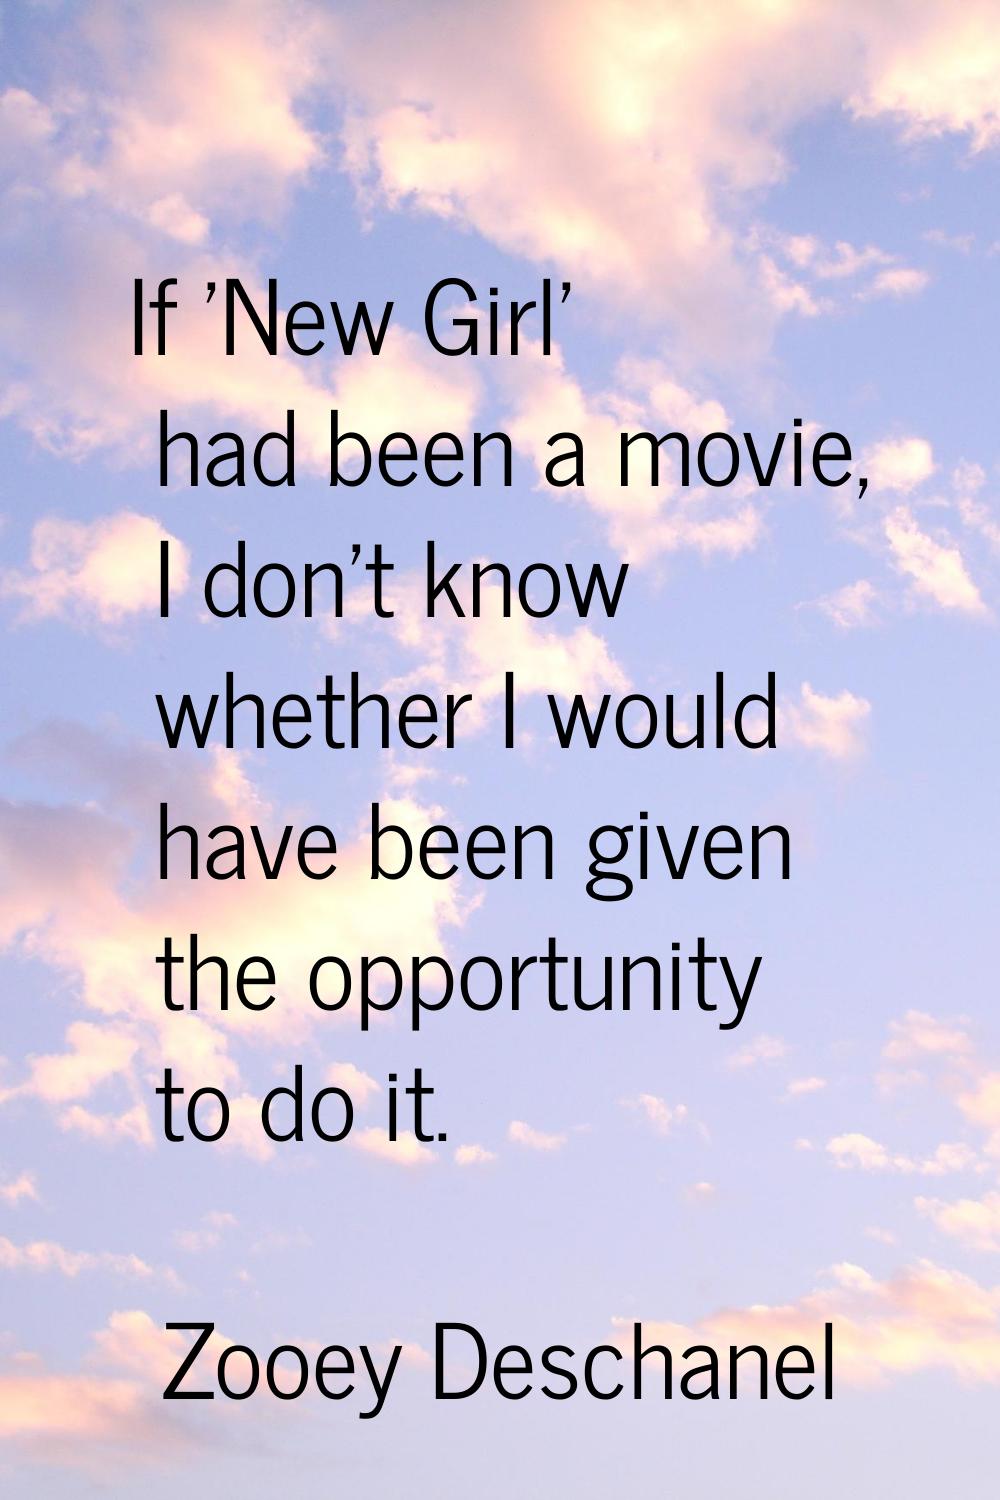 If 'New Girl' had been a movie, I don't know whether I would have been given the opportunity to do 